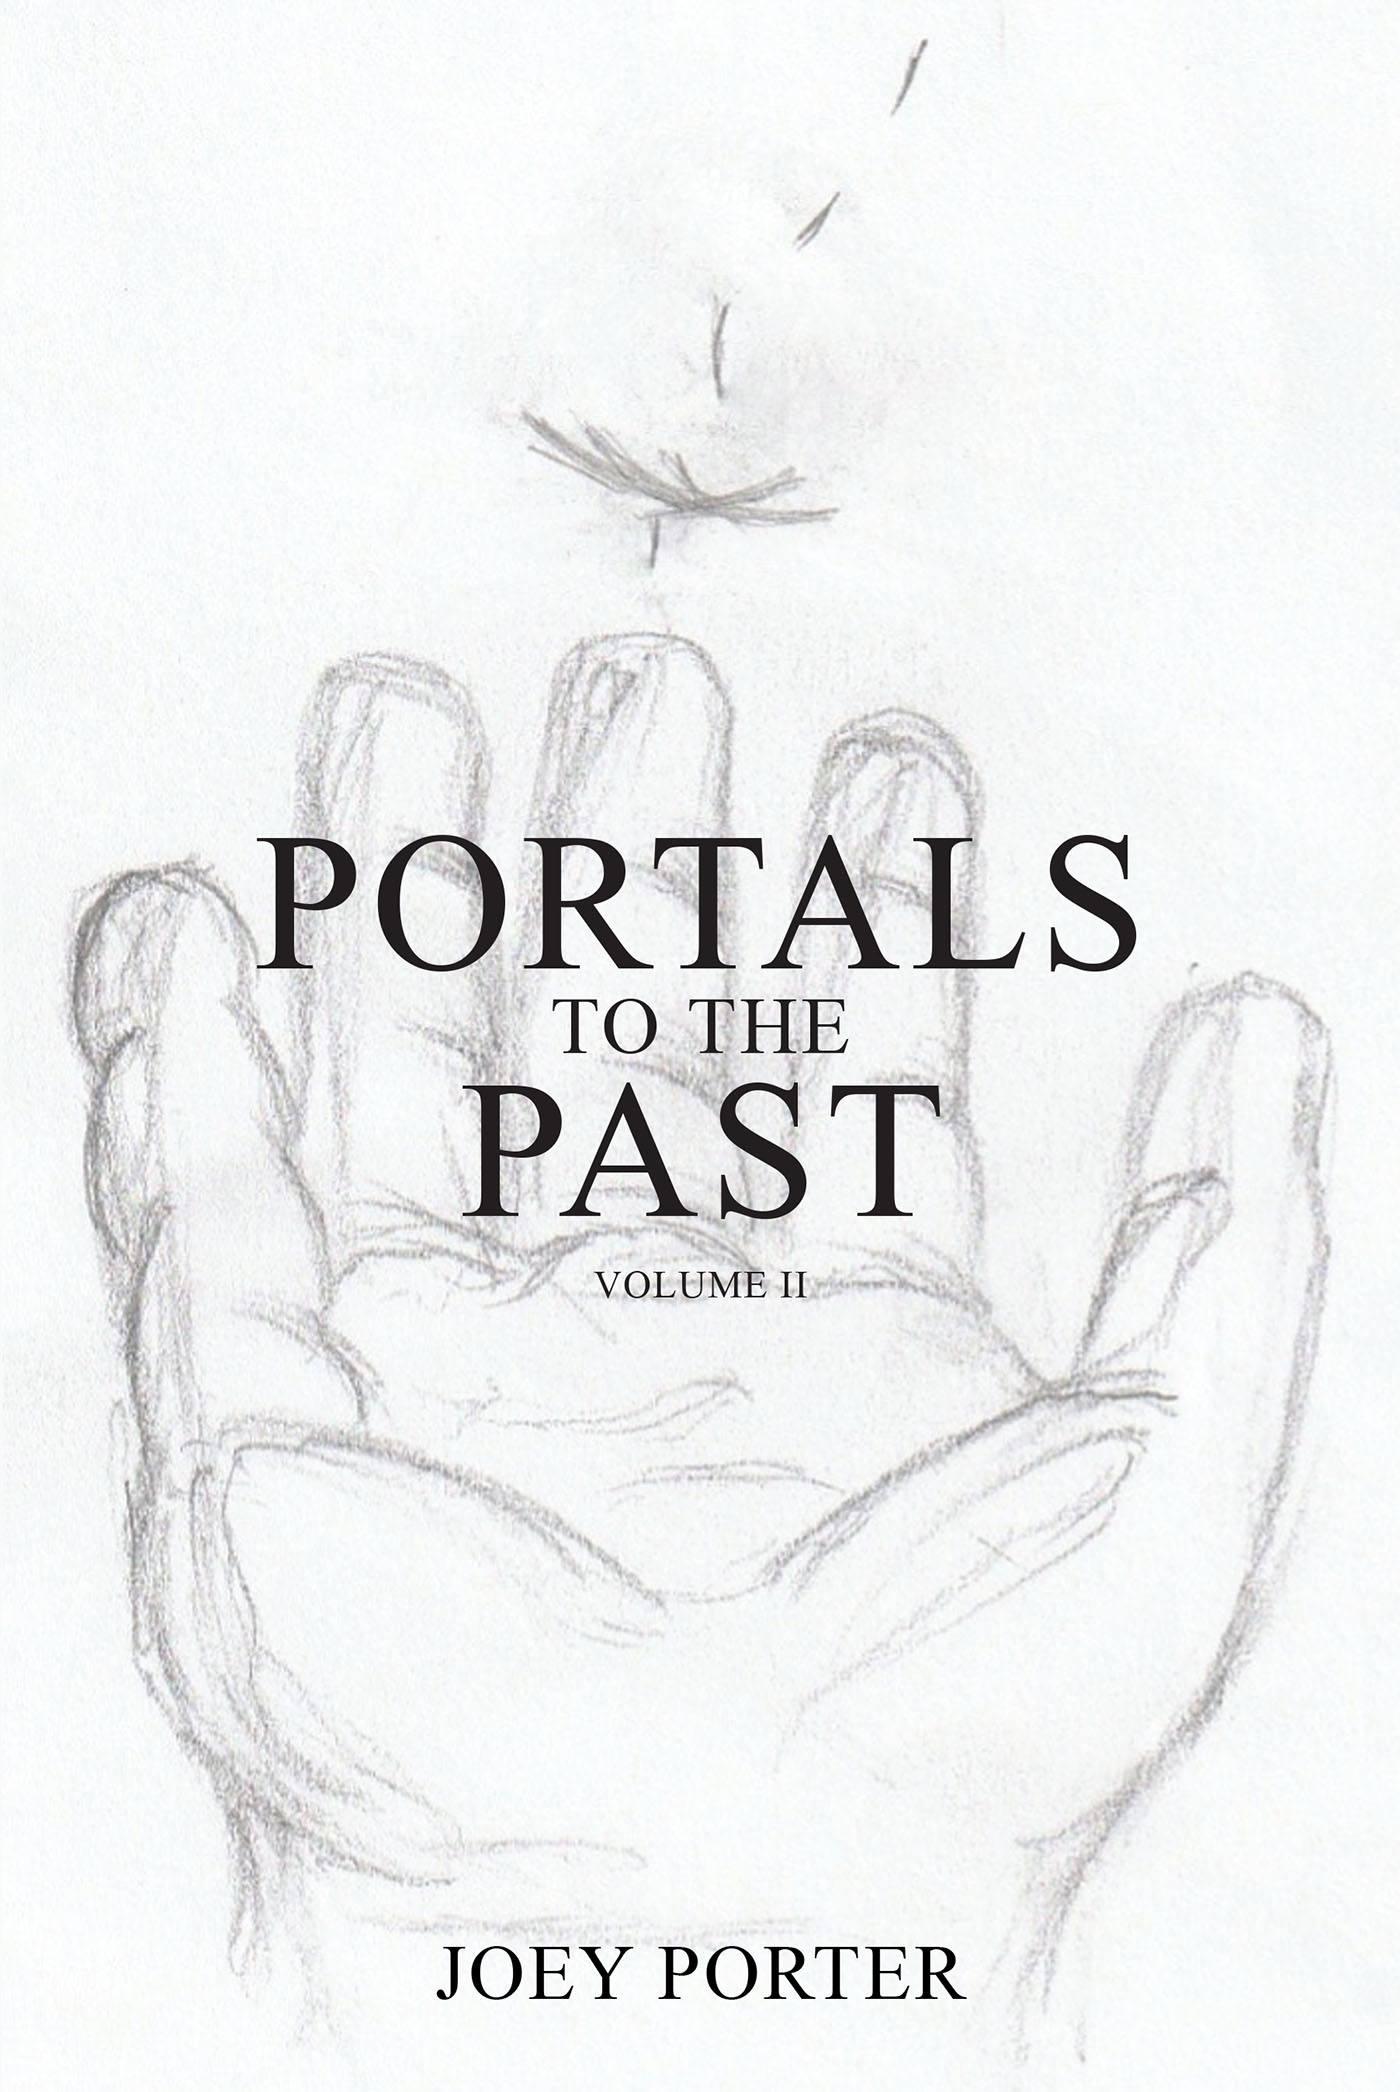 Joey Porter’s Newly Released “Portals to the Past: Volume II” is an Enjoyable Collection of Five Short Stories Rooted in Scripture